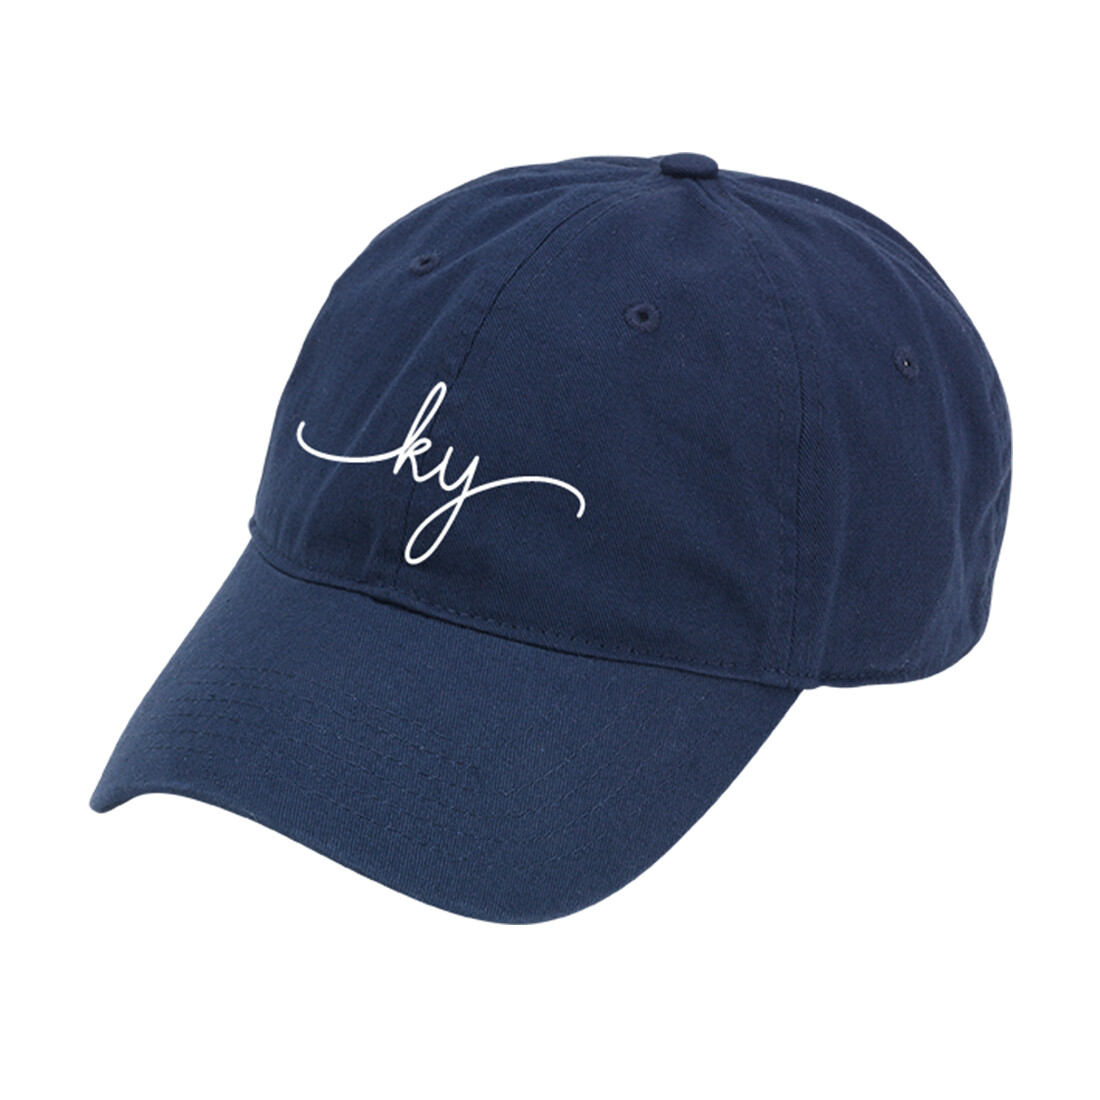 Kentucky Rep Your State Navy Hat